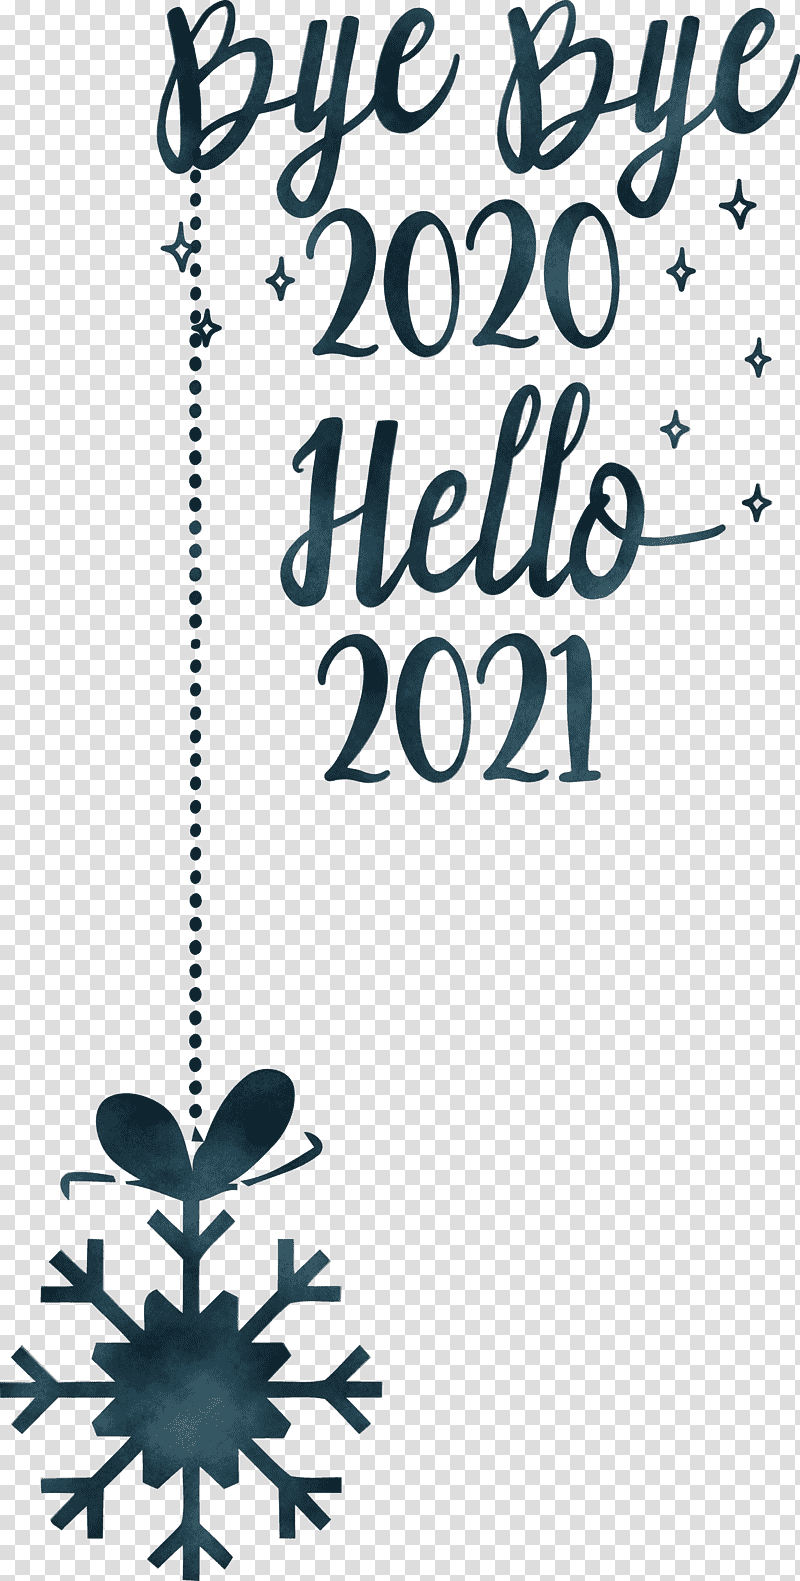 Happy New Year Drawing 2021 : Celebrate new year 2021 by wishing your